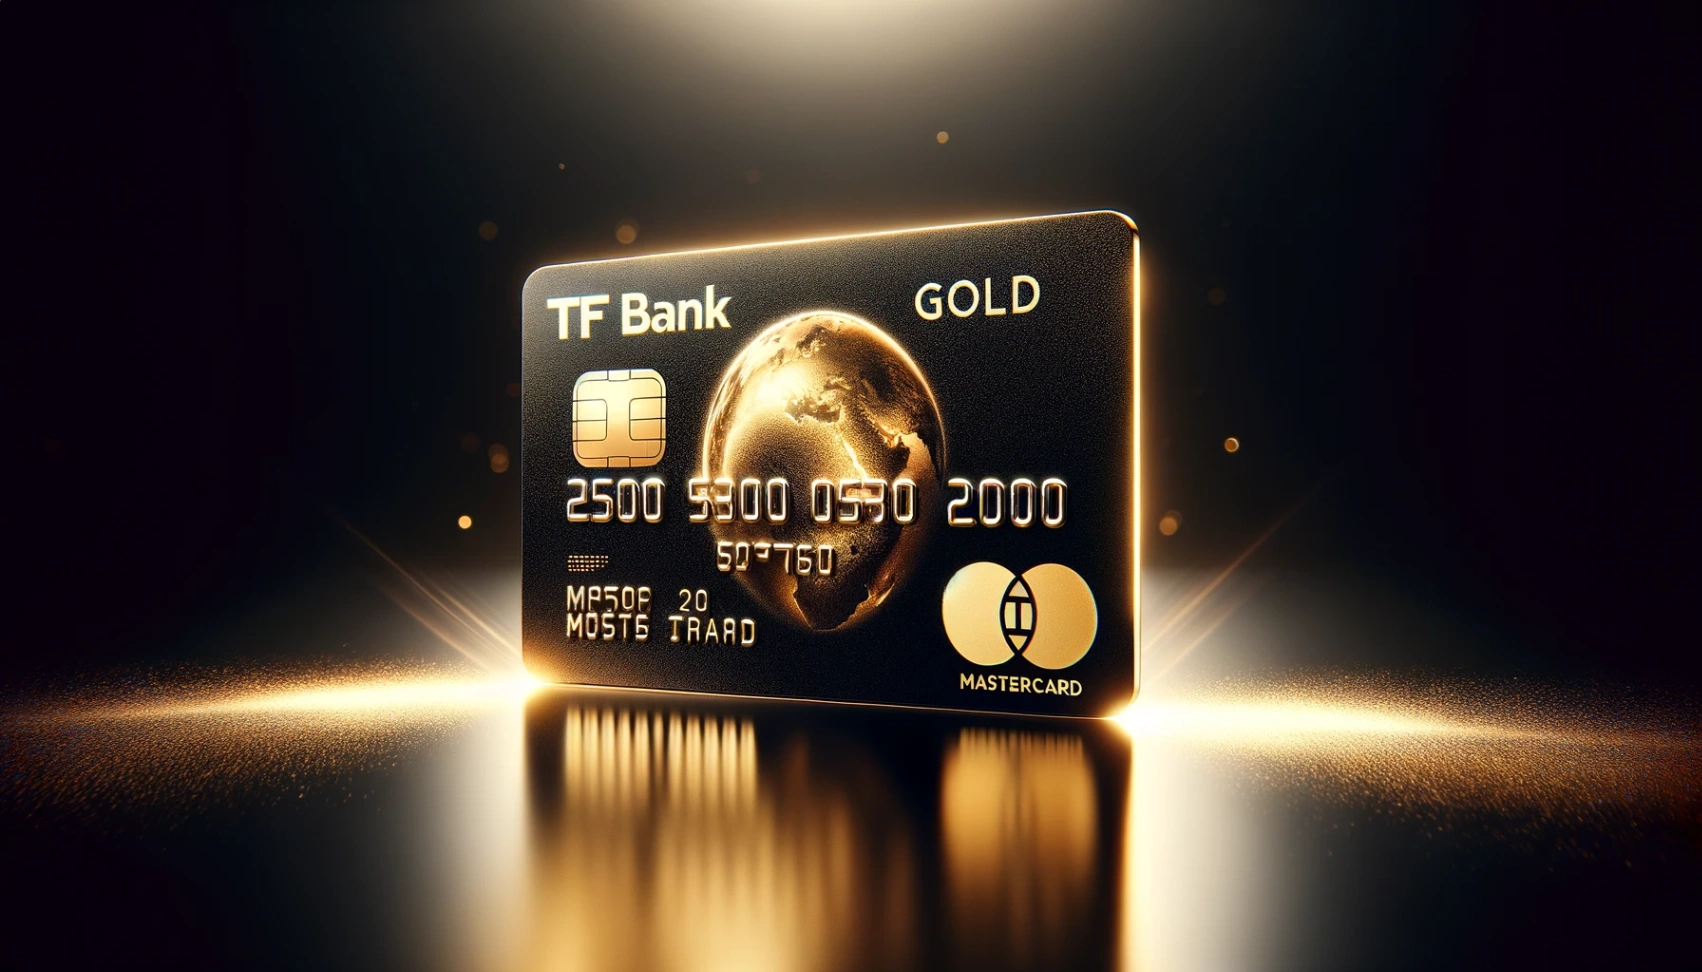 TF Bank Mastercard Gold: Navigate Your Application With This Online Guide